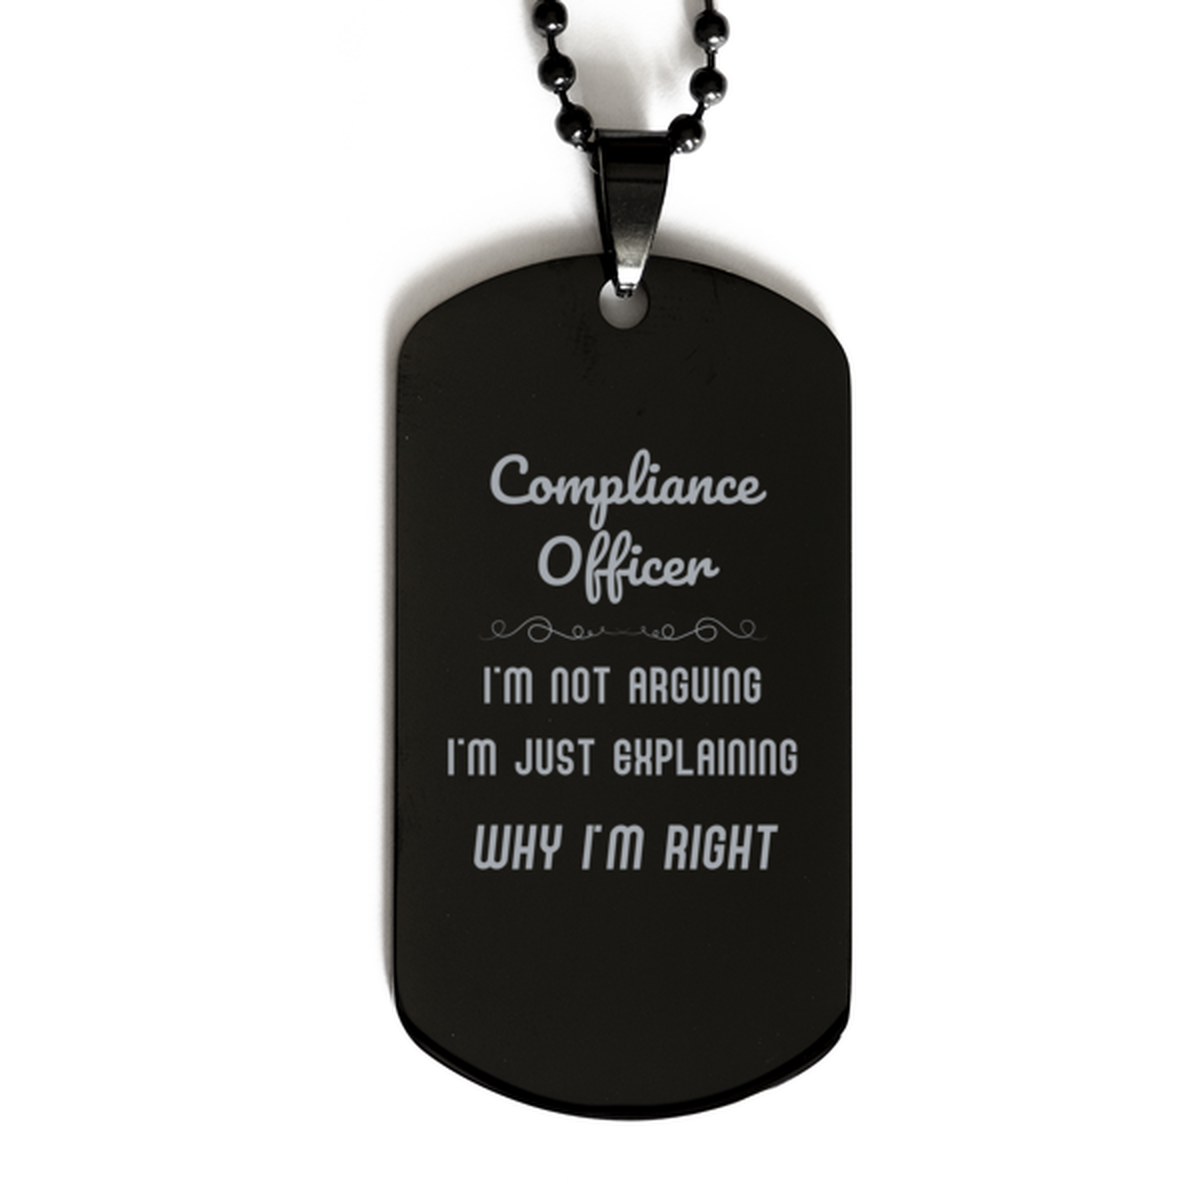 Compliance Officer I'm not Arguing. I'm Just Explaining Why I'm RIGHT Black Dog Tag, Funny Saying Quote Compliance Officer Gifts For Compliance Officer Graduation Birthday Christmas Gifts for Men Women Coworker